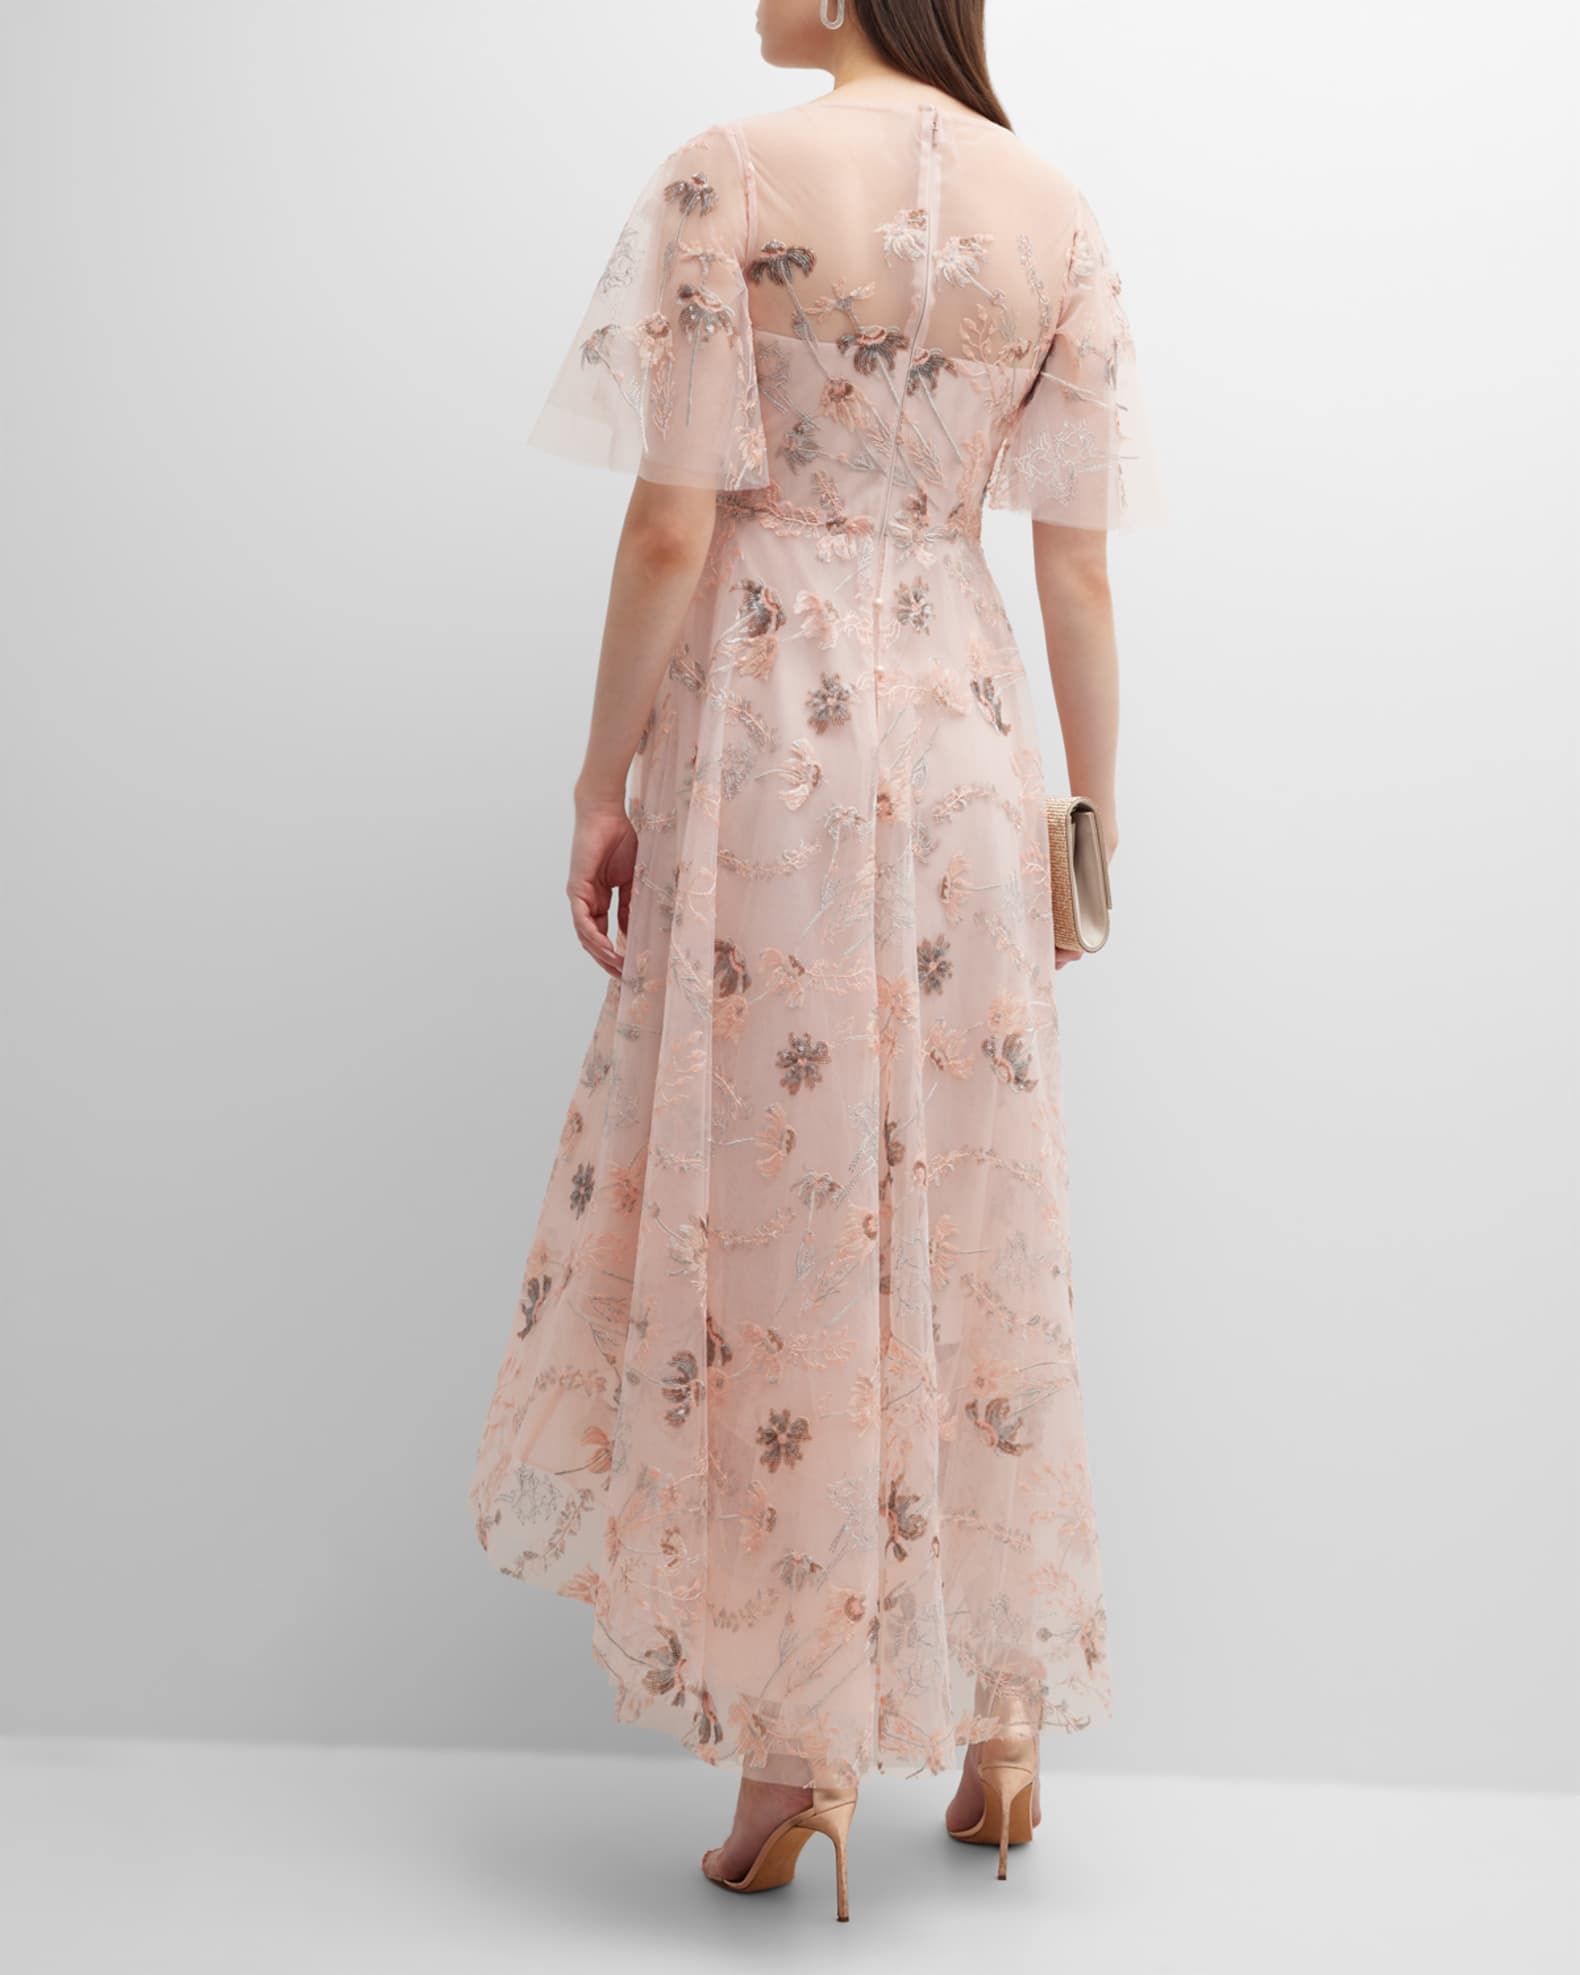 Rickie Freeman for Teri Jon High-Low Floral-Embroidered Tulle Gown ...